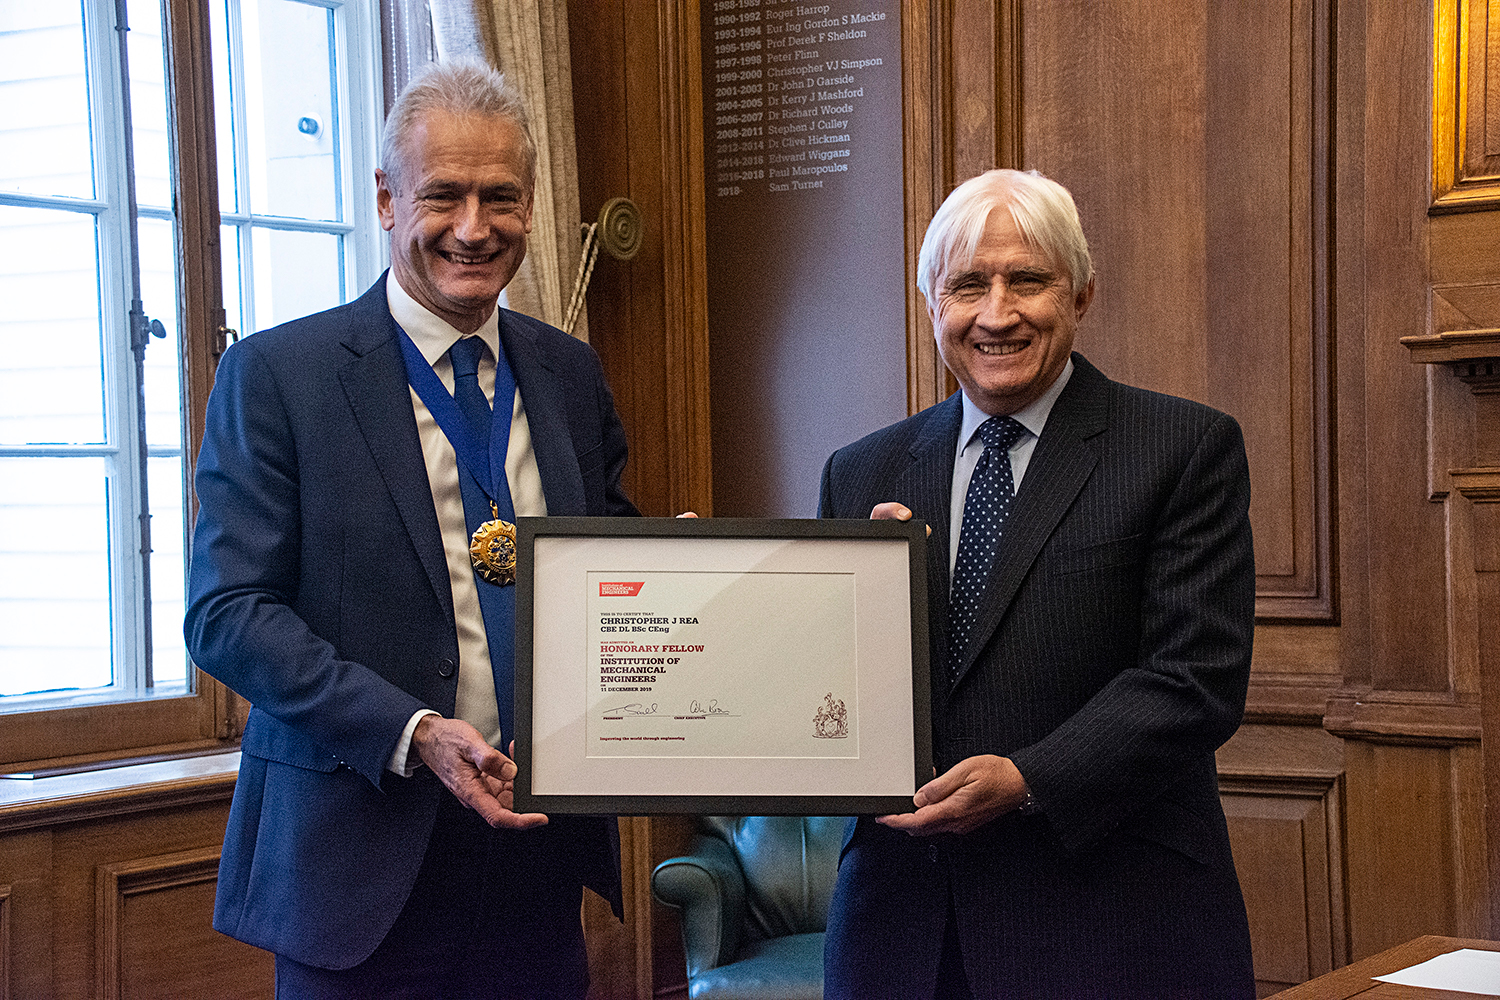 AESSEAL MD Chris Rea awarded highest accolade by IMechE